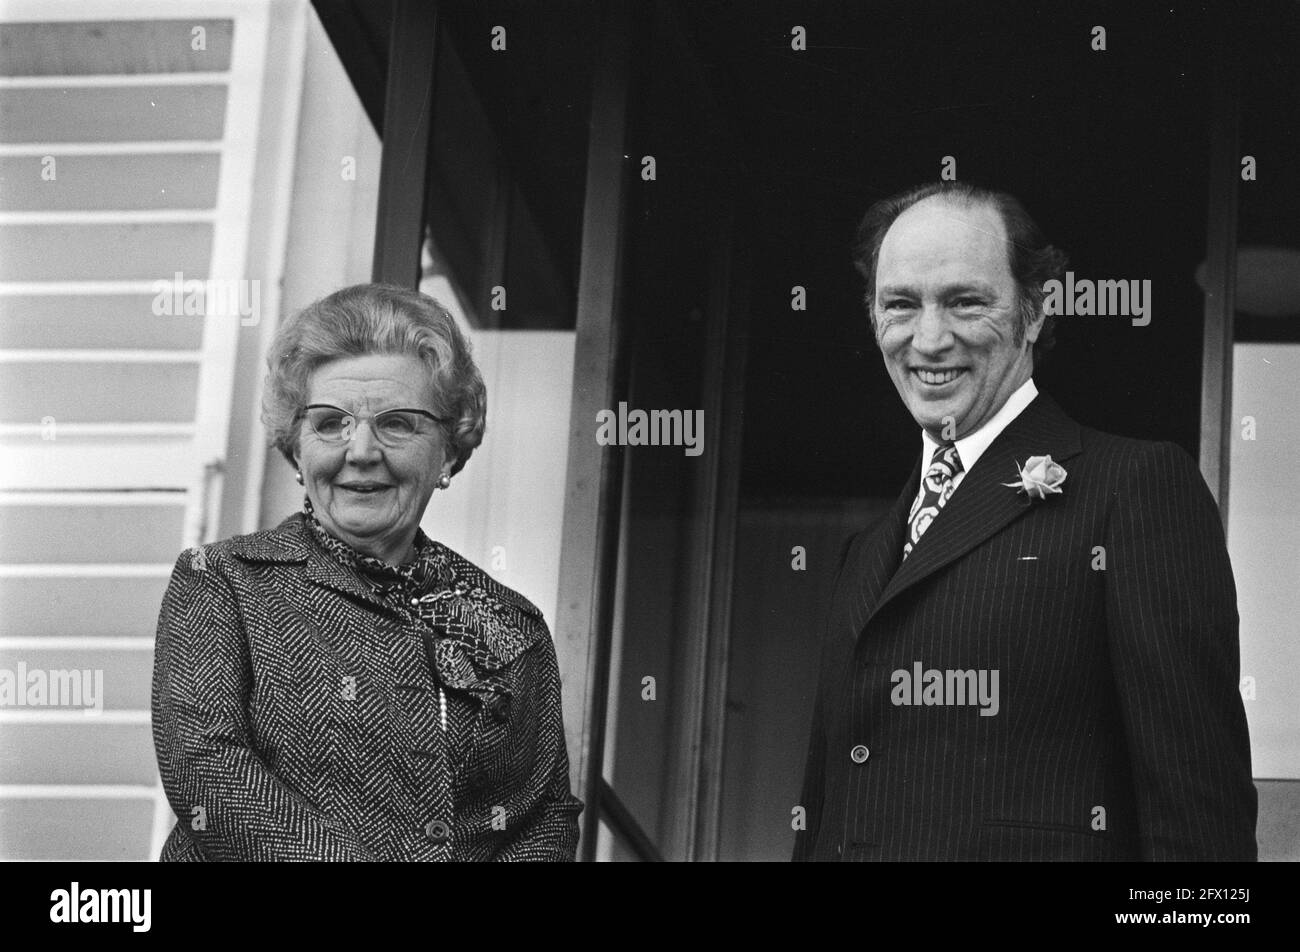 Queen Juliana receives Prime Minister Trudeau at Soestdijk Palace, February 27, 1975, queens, prime ministers, palaces, The Netherlands, 20th century press agency photo, news to remember, documentary, historic photography 1945-1990, visual stories, human history of the Twentieth Century, capturing moments in time Stock Photo